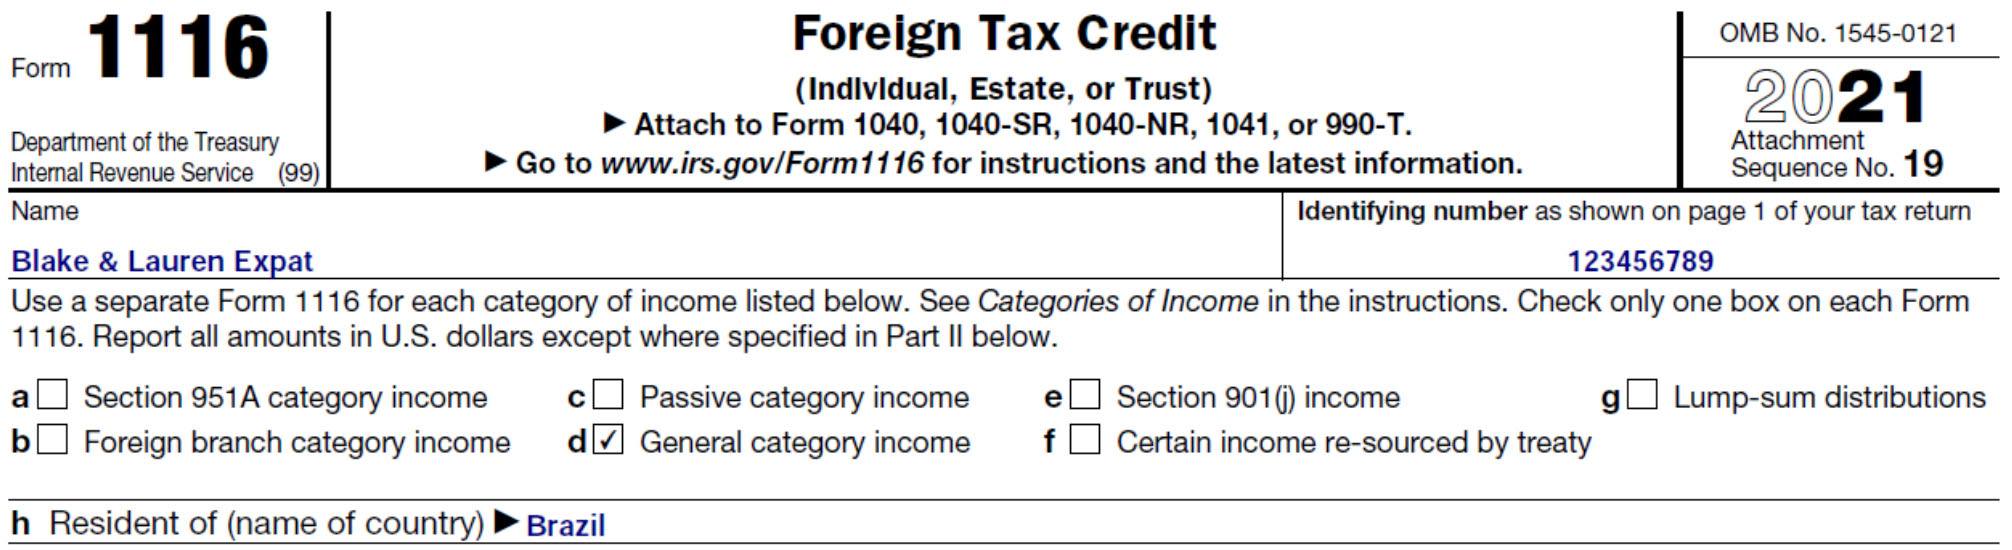 Form 1116 Foreign Tax Credit Example Showing Personal Information Sample Data